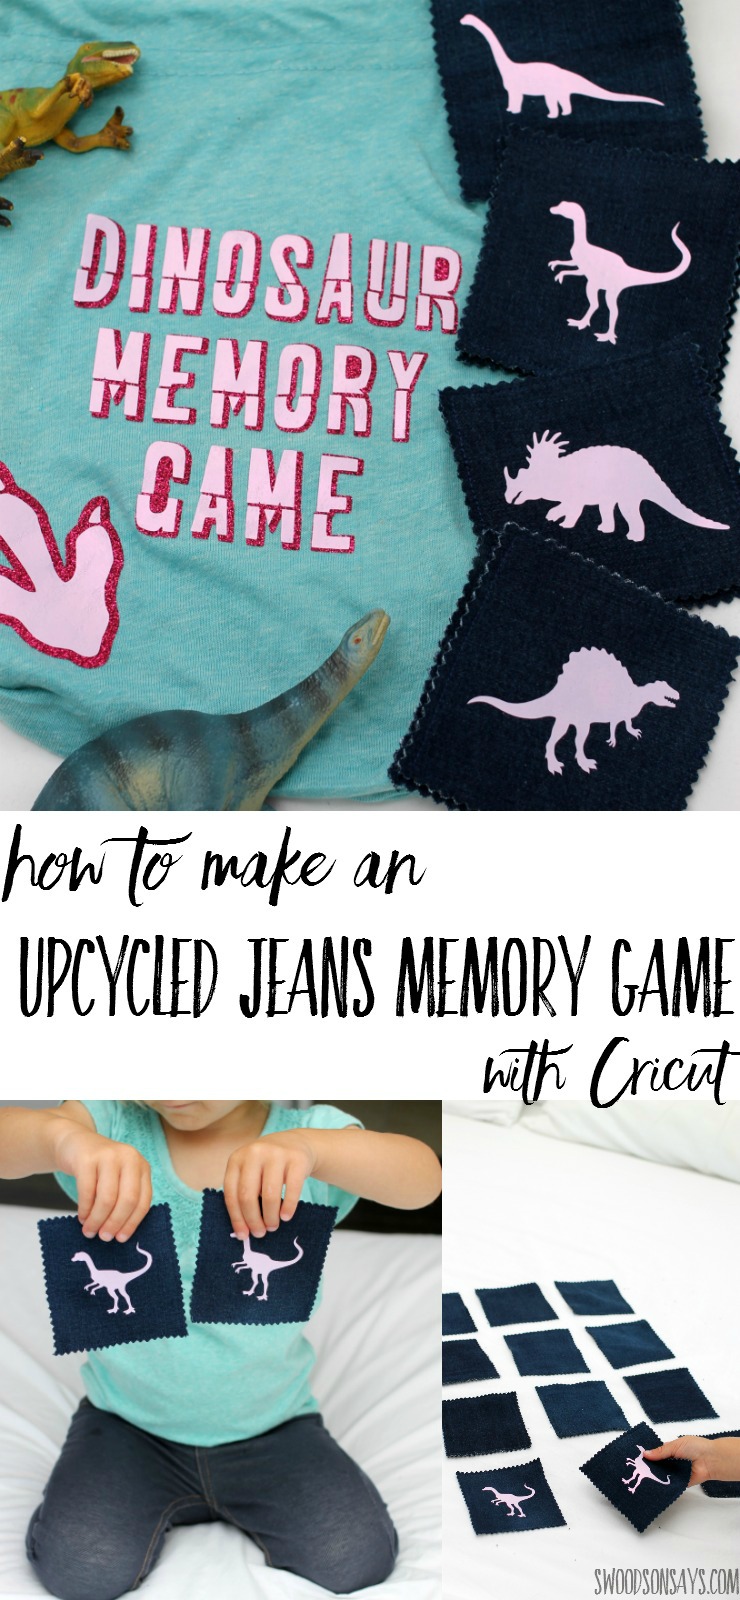 How to make a fabric scrap matching game - upcycled jean scraps make for a fun memory game and a Cricut cuts out iron-on designs super easily. Tutorial for how to make the simple matching game and links to the project on Cricut Design Space.